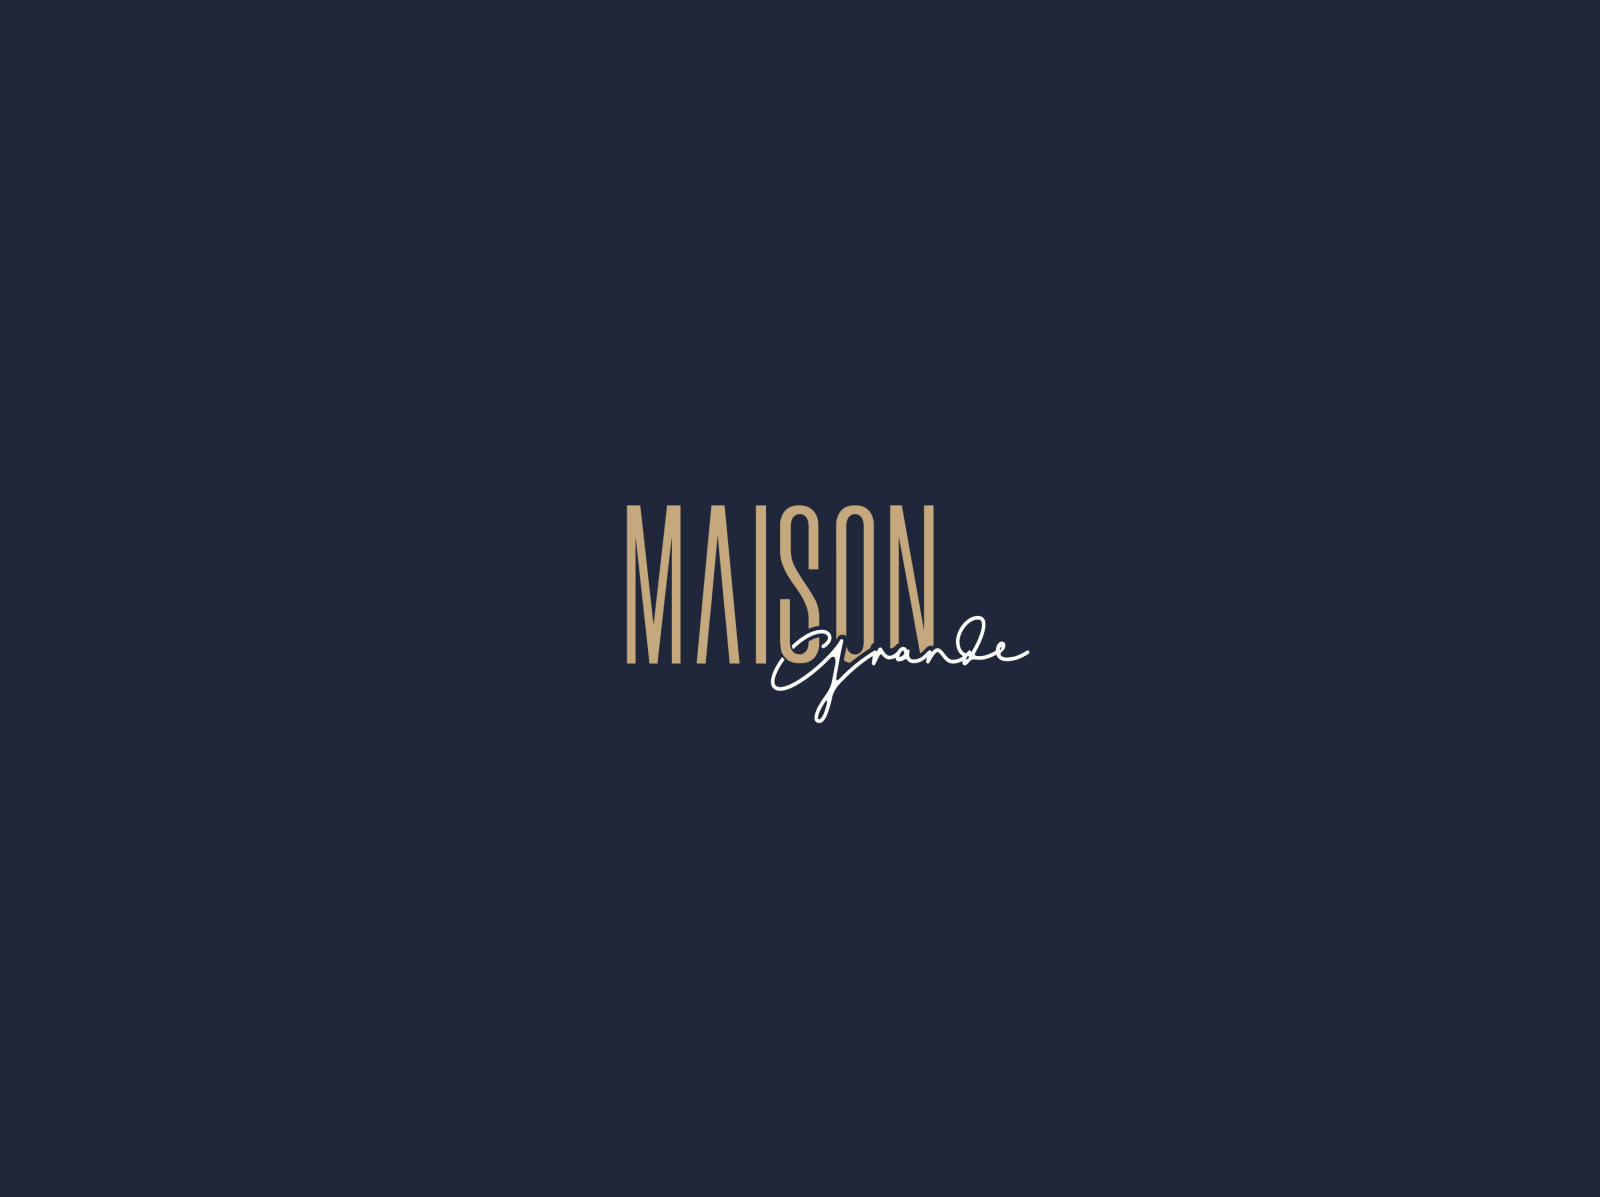 MAISON GRANDE by Tran Phuong Linh on Dribbble